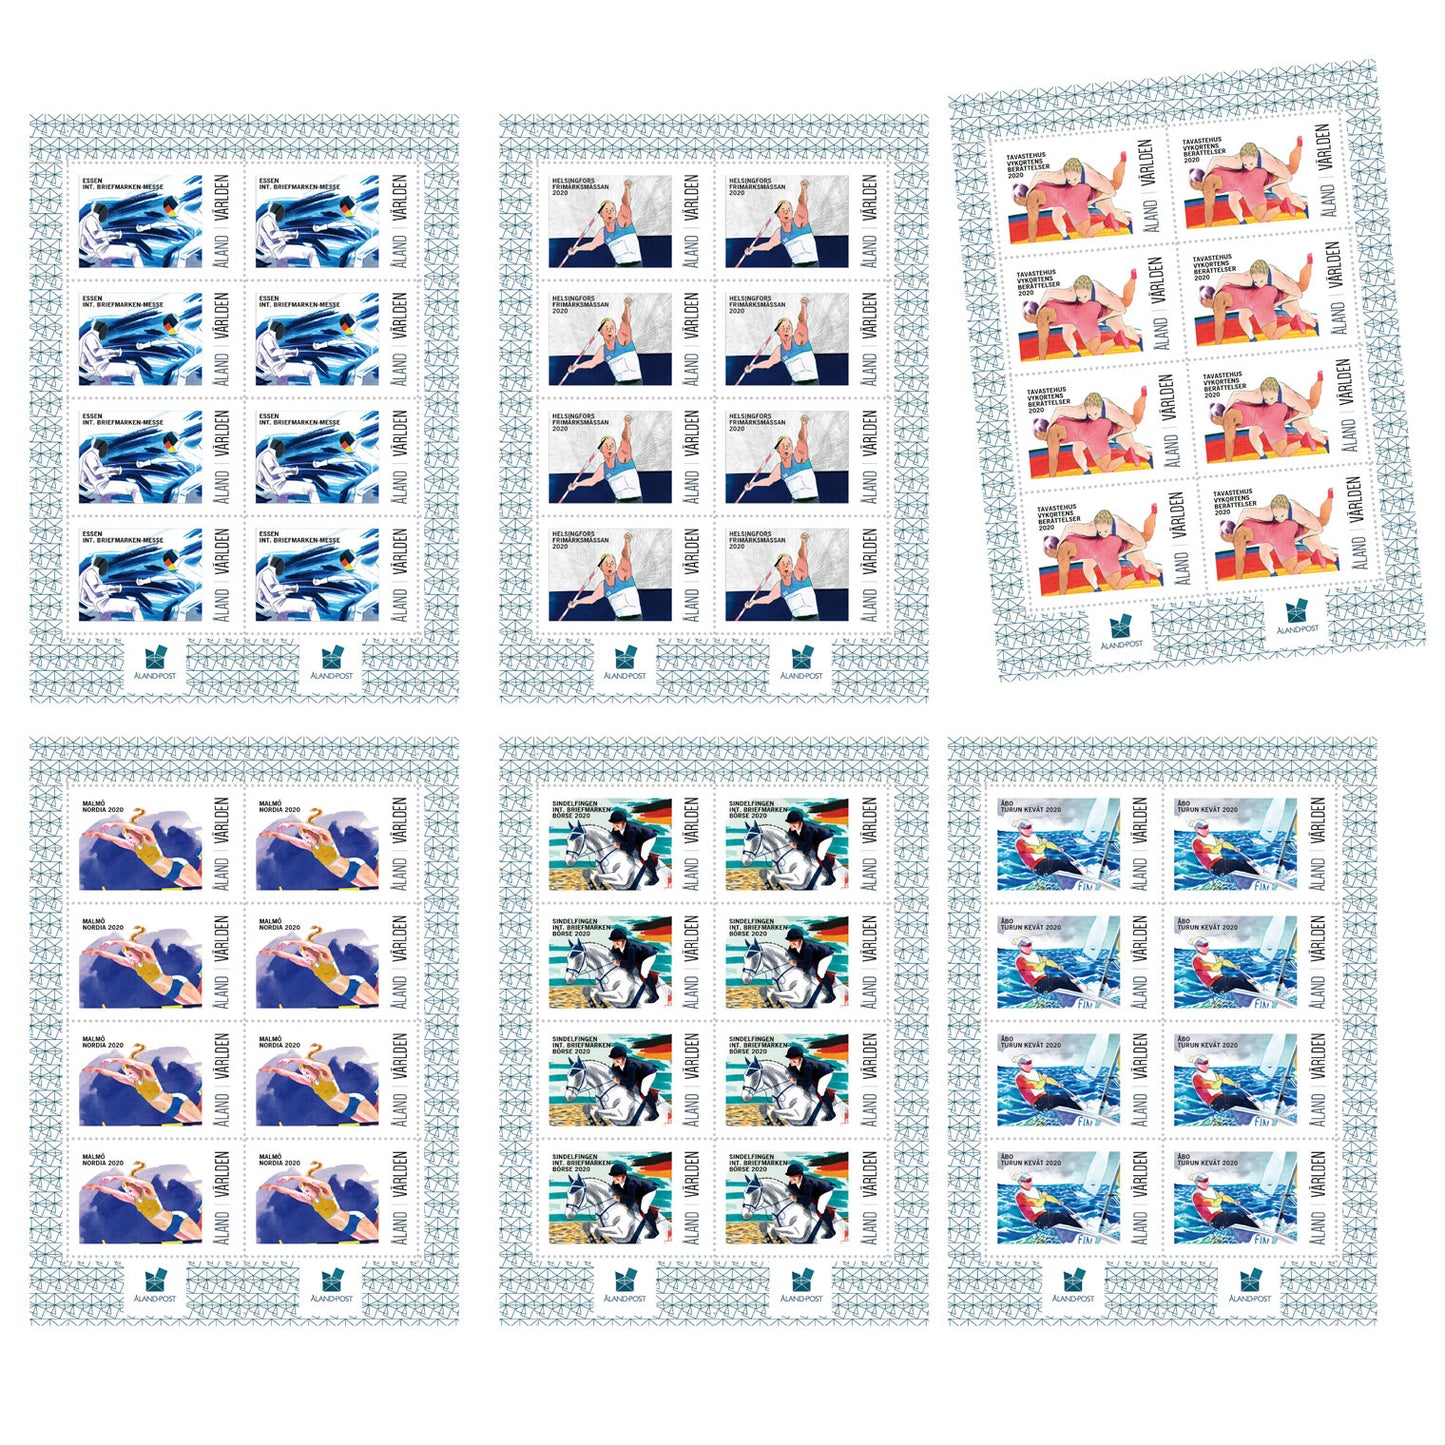 Exhibition stamps 2020